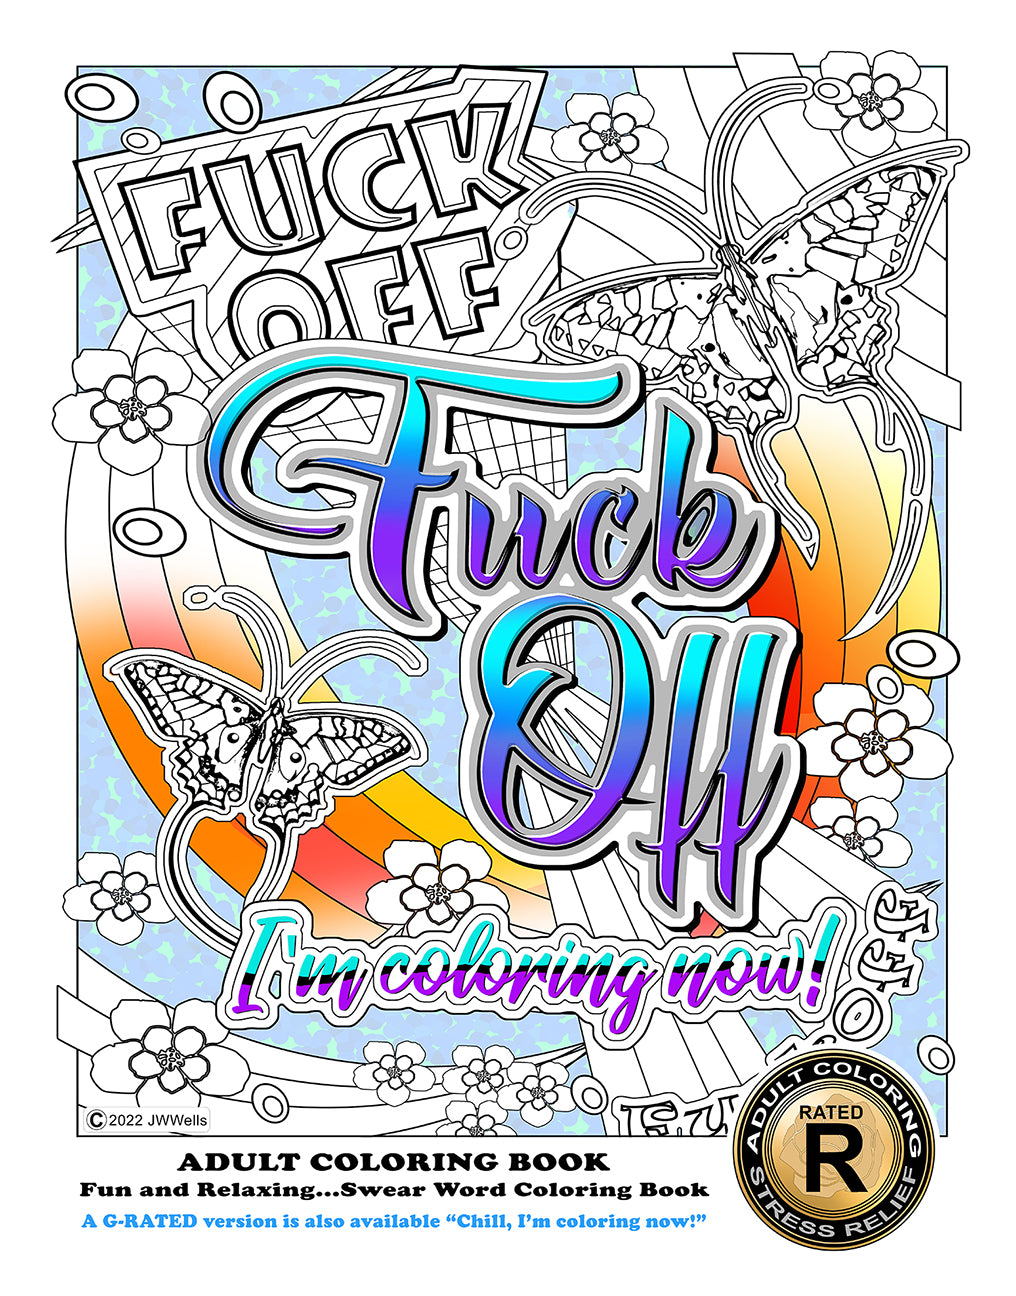 Swear Word 2 Adult Coloring Book: Relax with Curse Words a book by